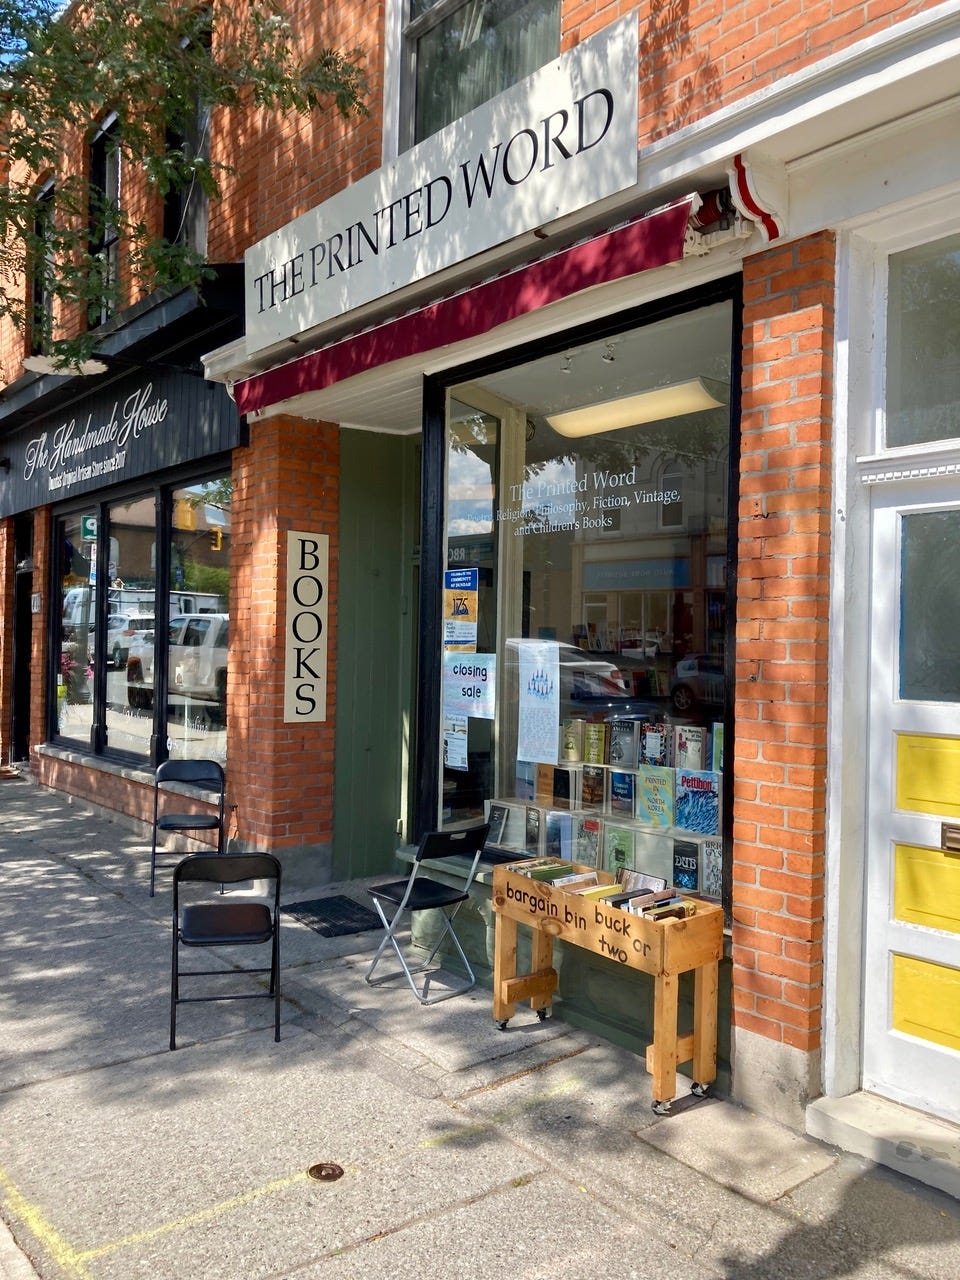 Exterior of a red brick building with a glass storefront filled with books on display. A sign above reads The Printed Word. Three folding chairs are set up beside a wooden cart with black lettering: bargain bin, buck or two